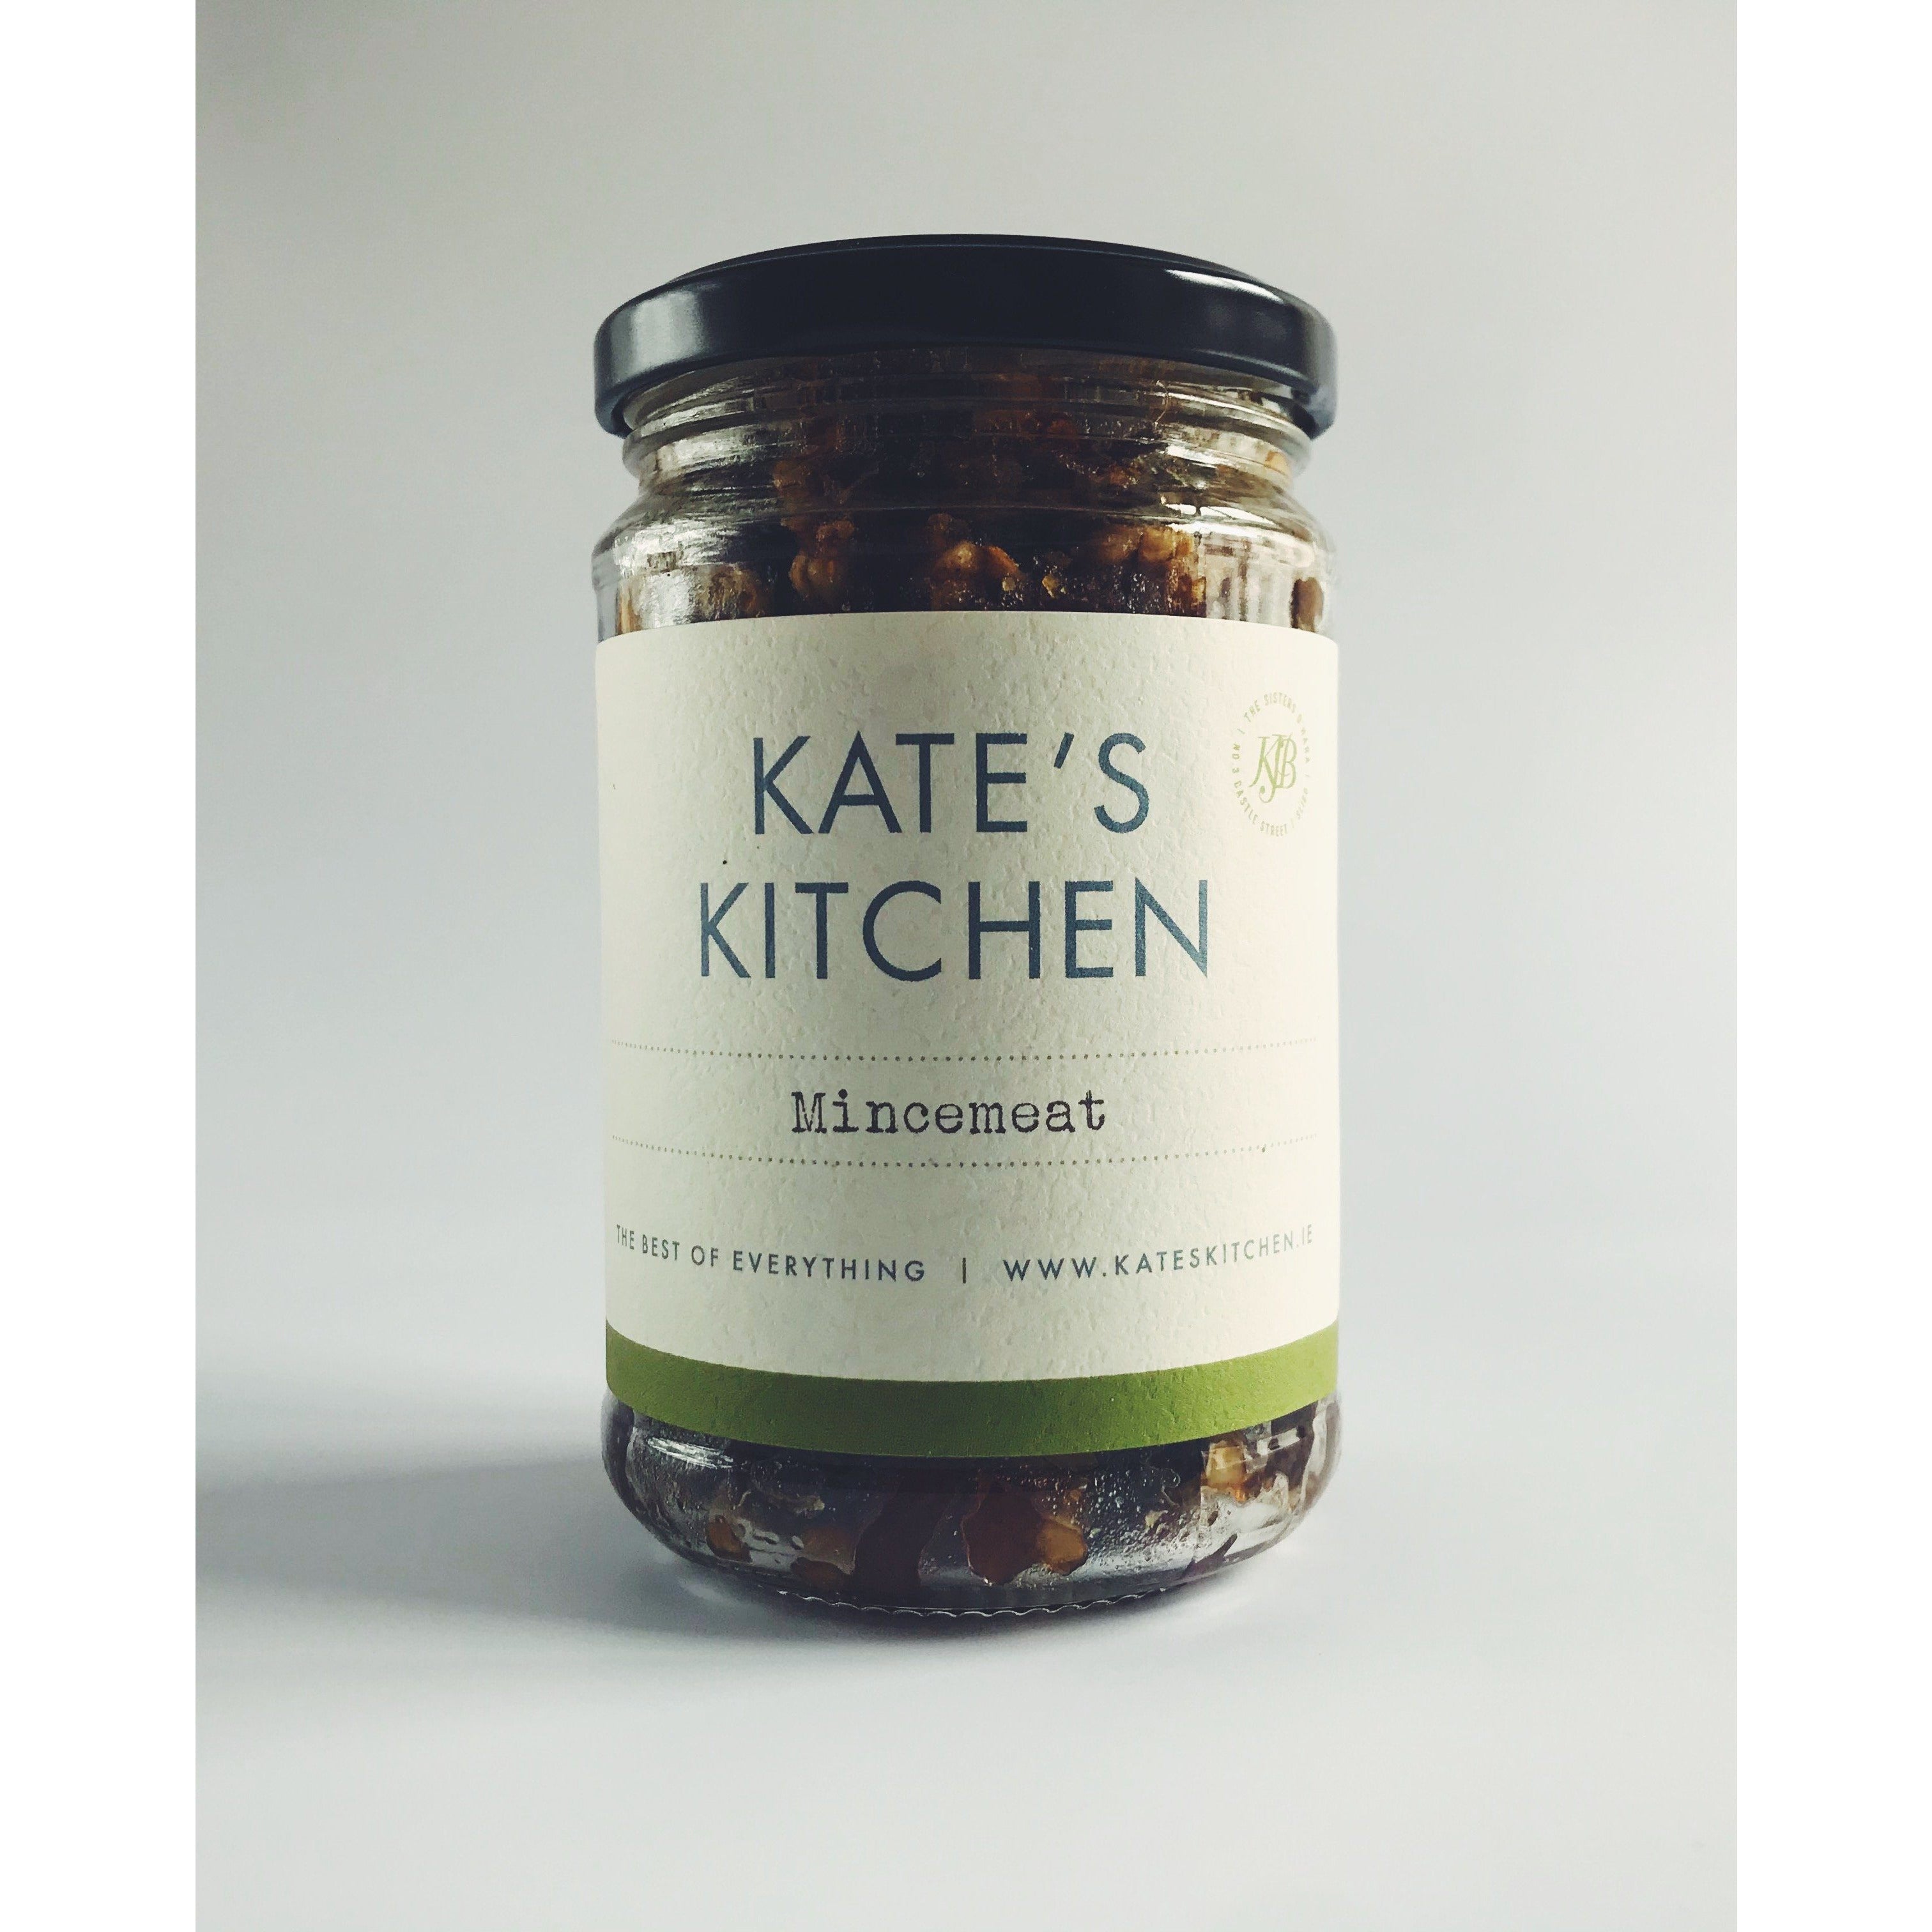 Kate's Mincemeat - Kate's Kitchen